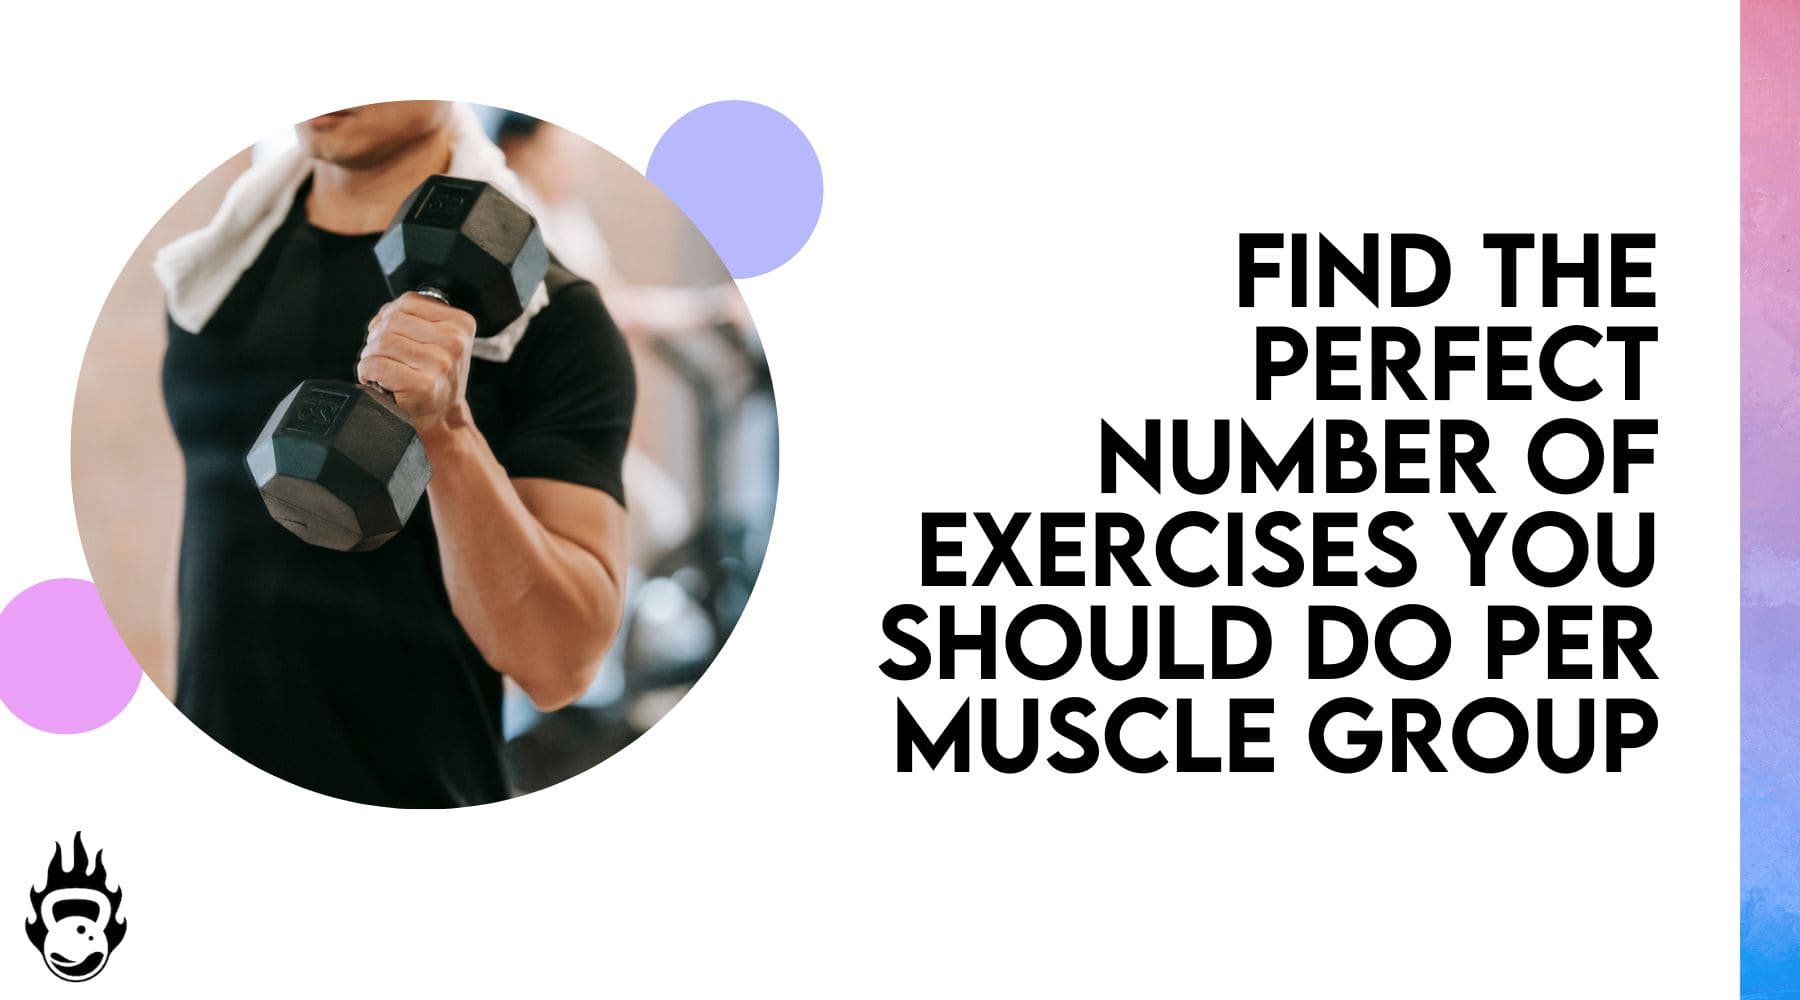 Main Muscle Groups: Exercises for Each Muscle Group